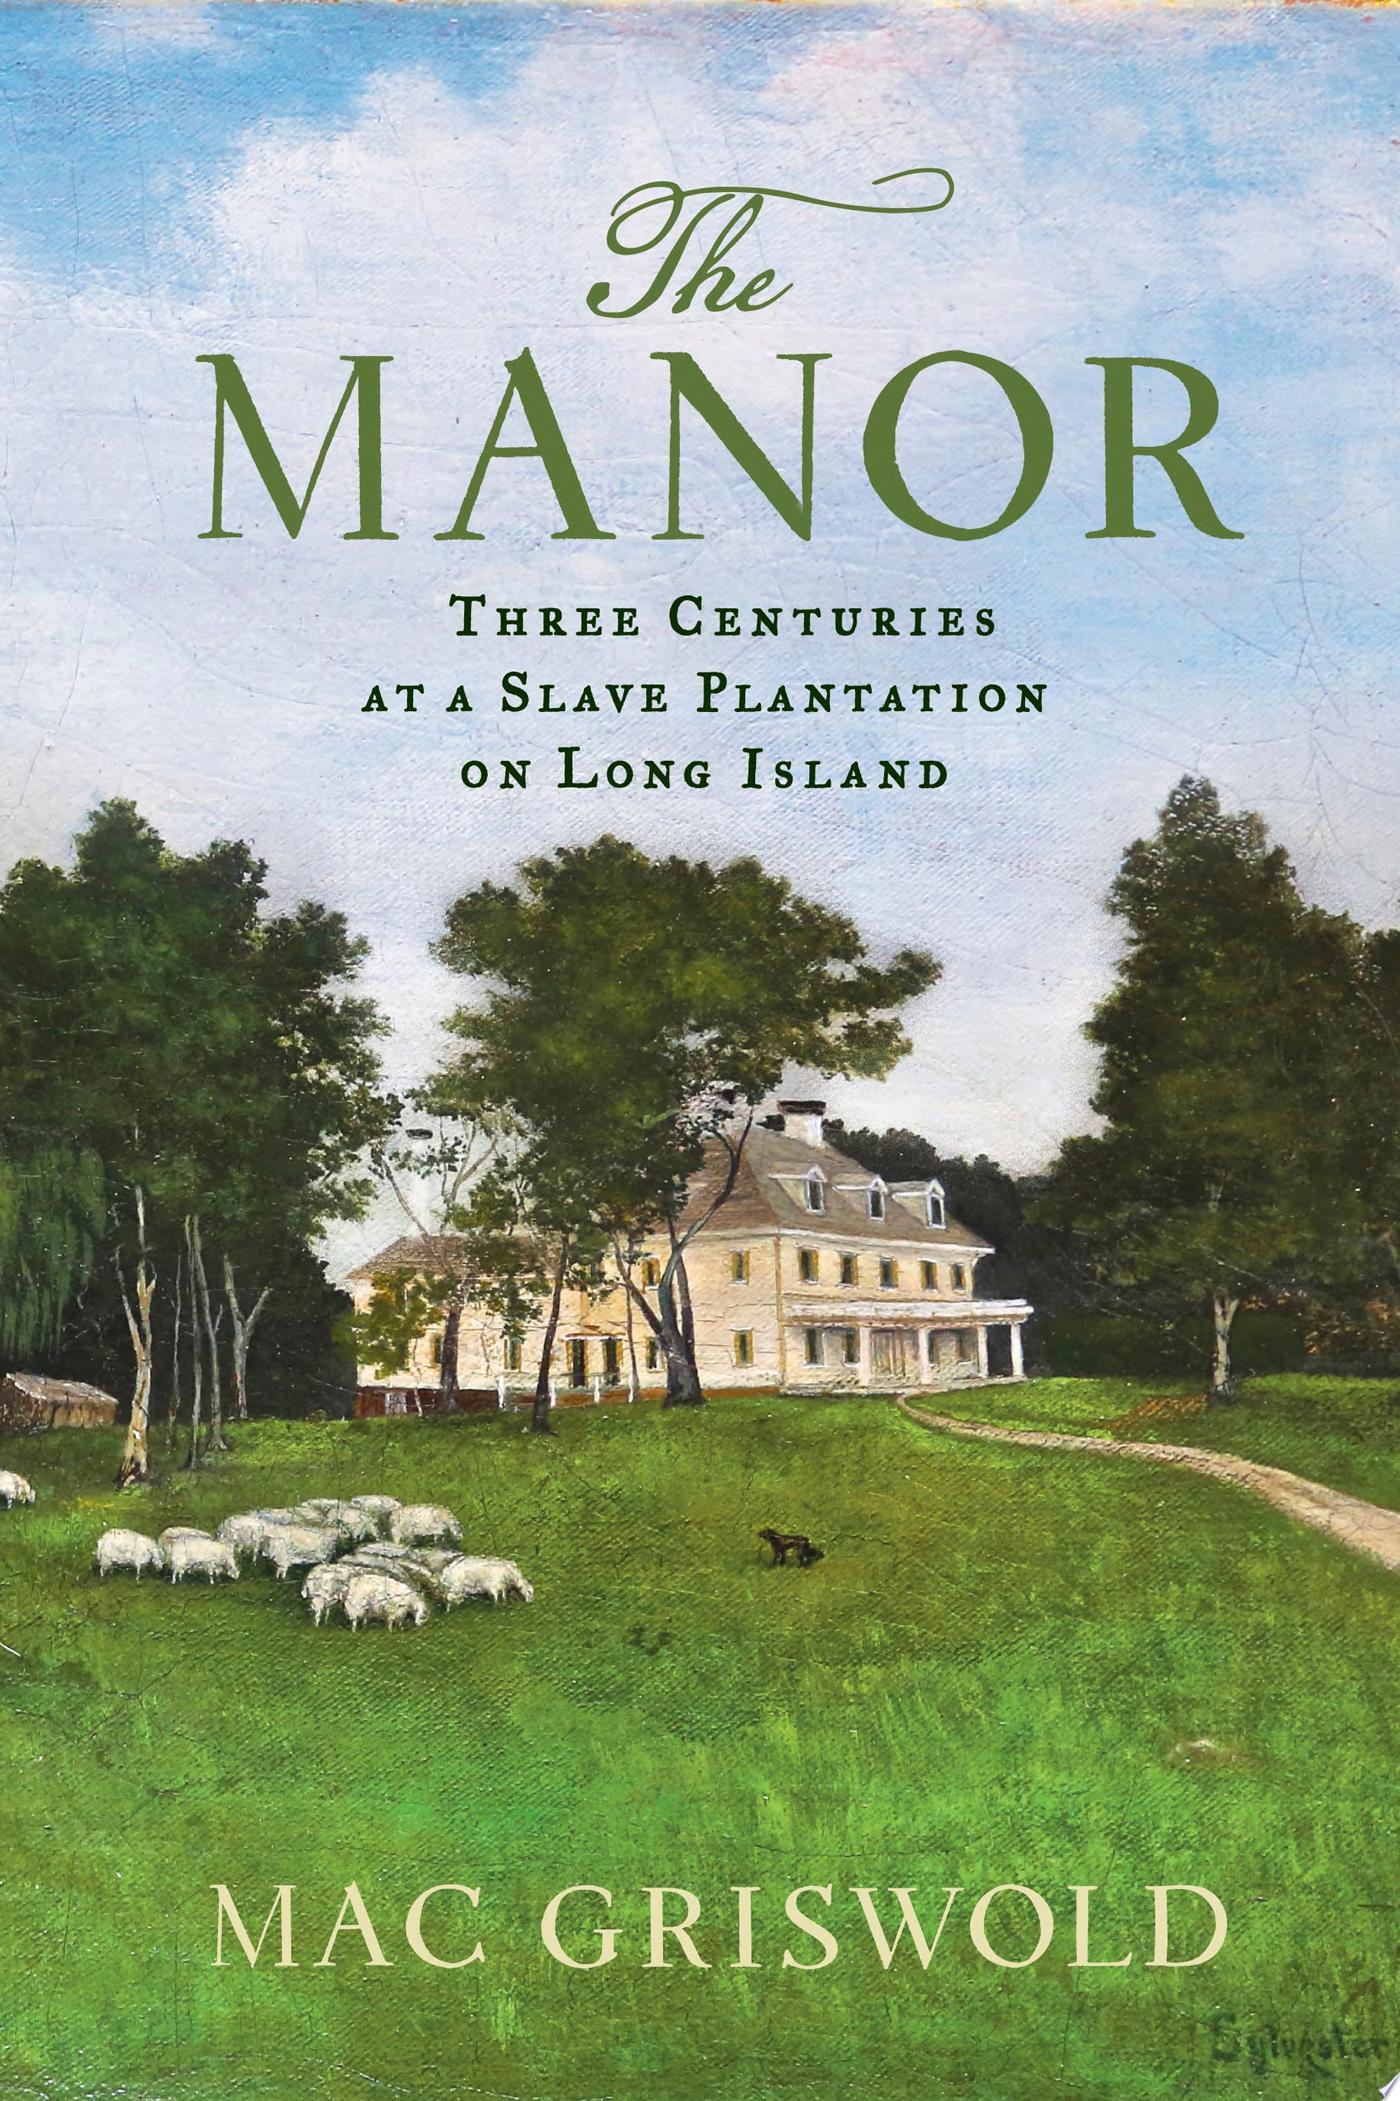 Image for "The Manor: Three Centuries at a Slave Plantation on Long Island"